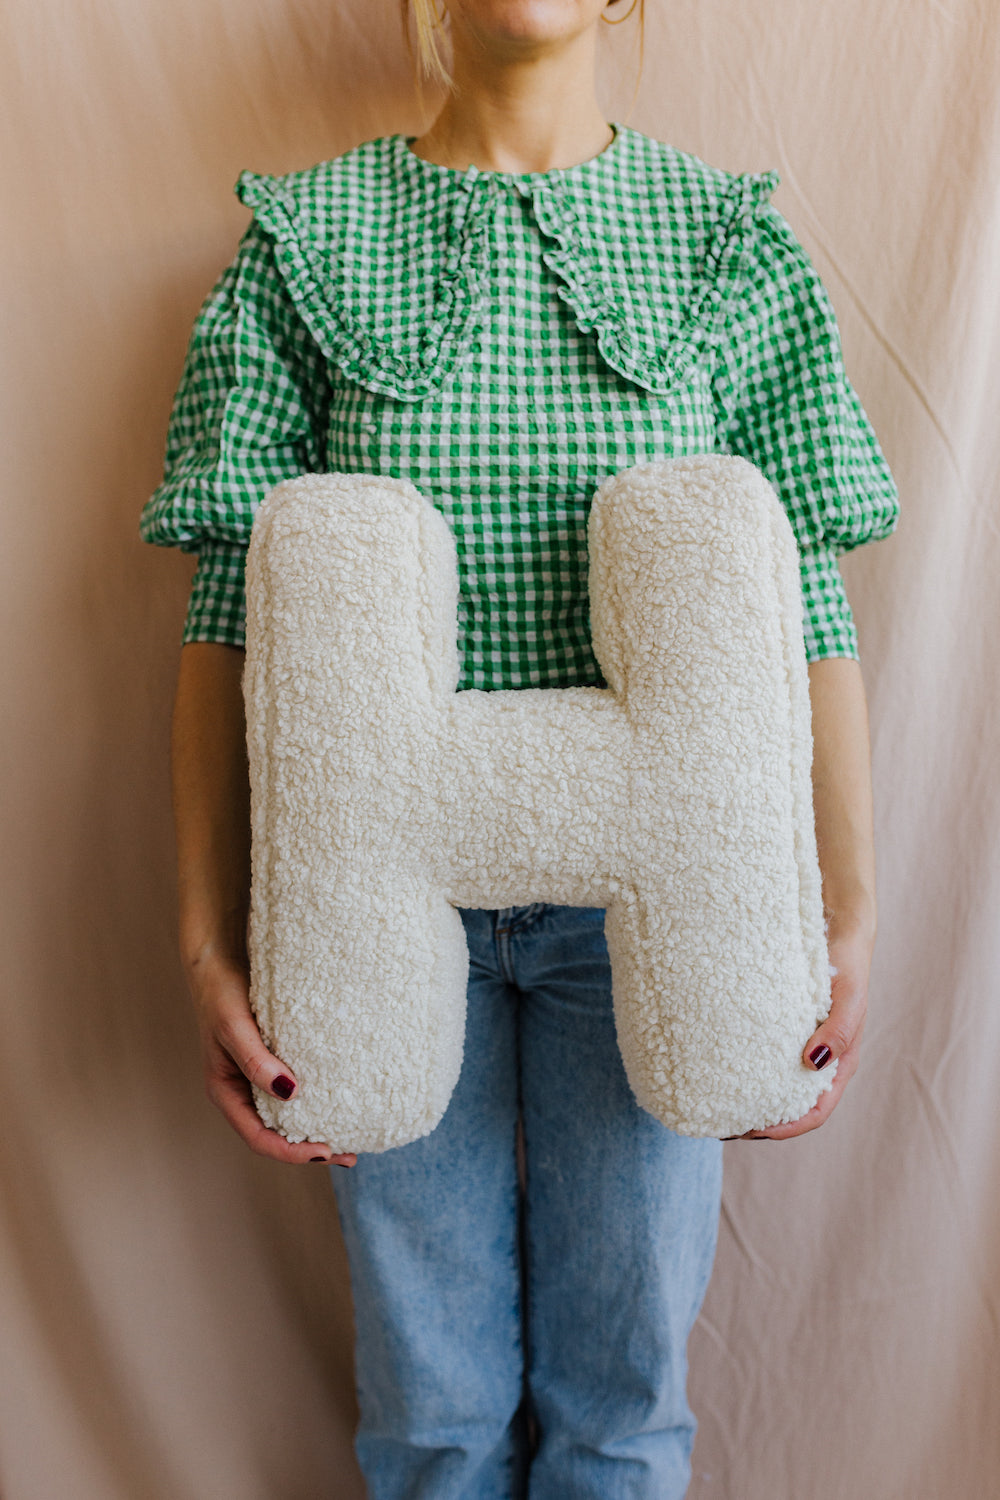 Boucle letter cushion H Teddy pillow by bettys home held by woman in green shirt in her hands